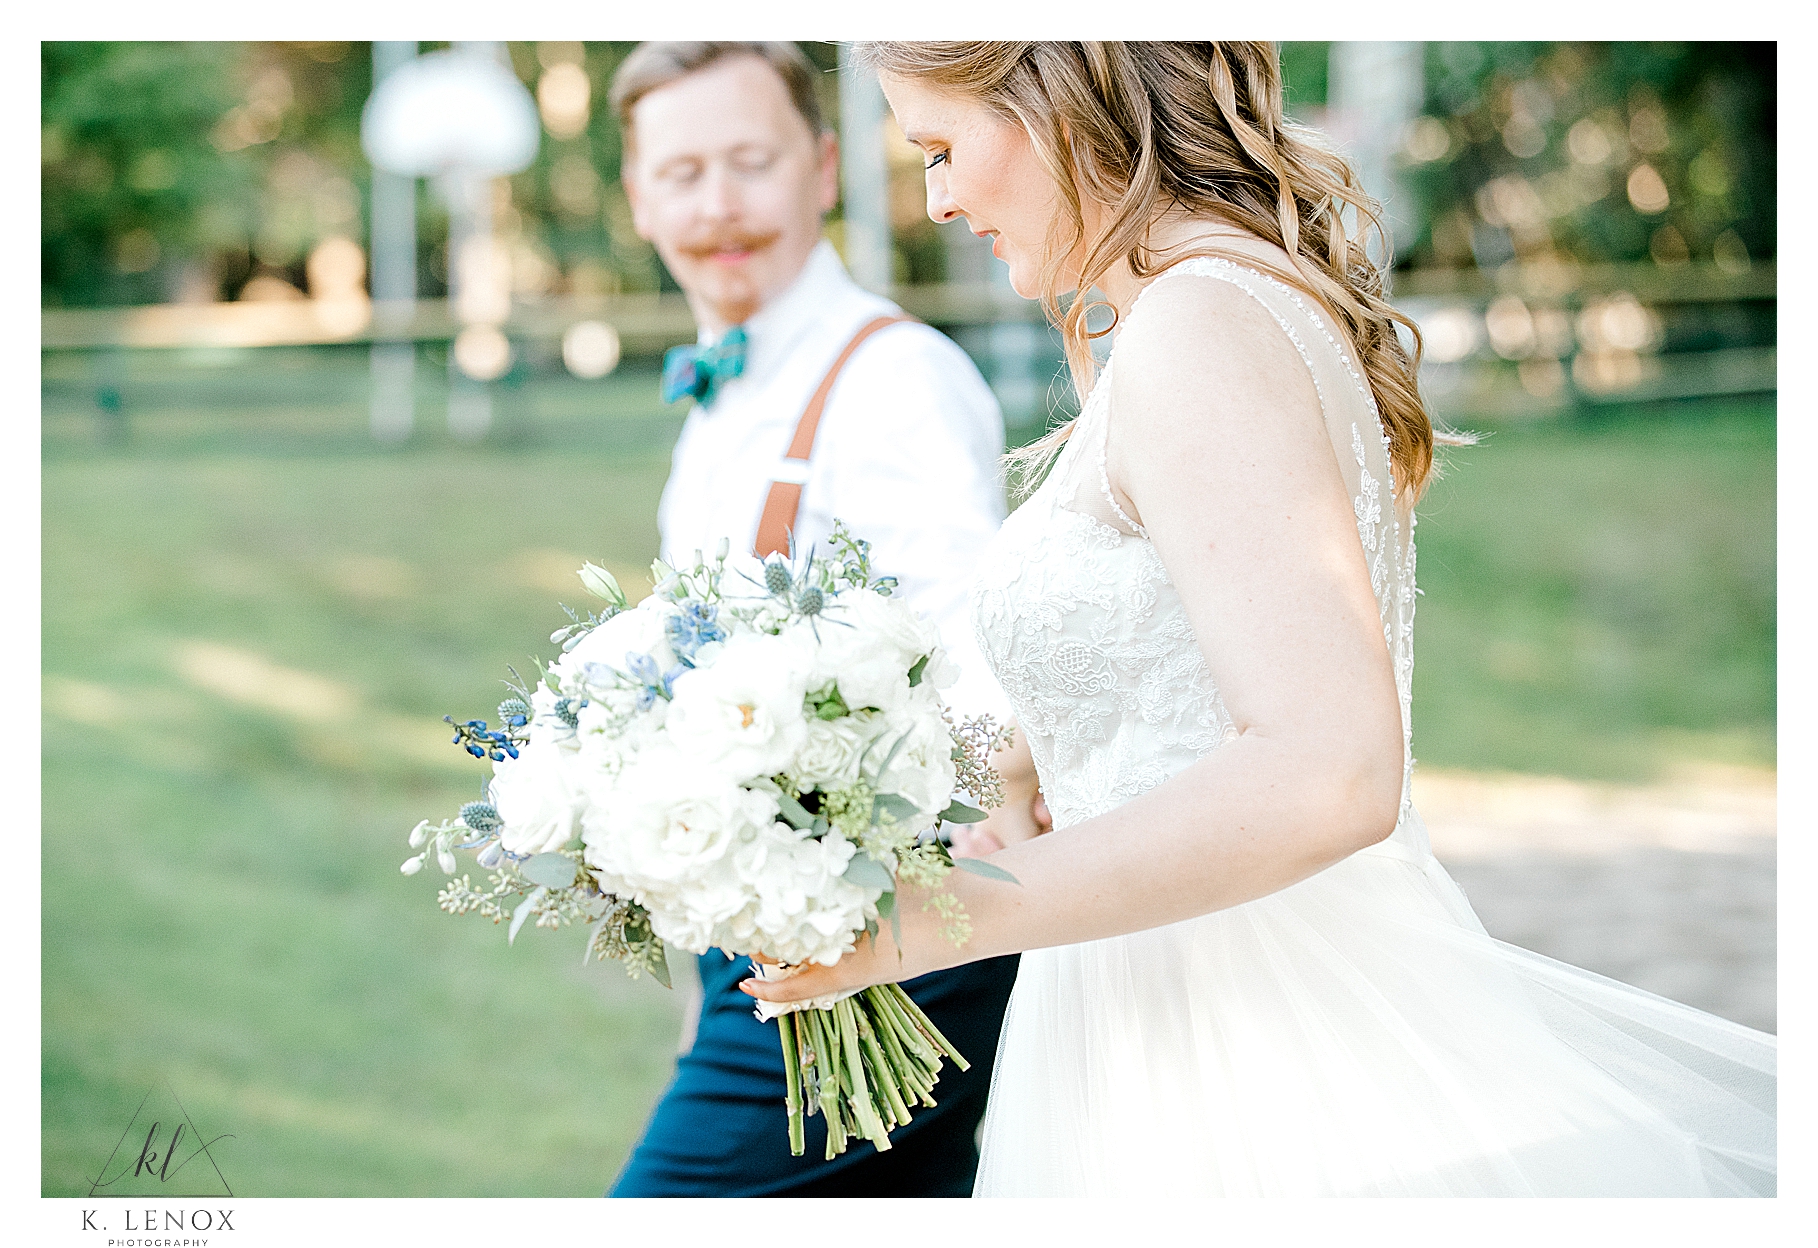 Candid photo of a bride and groom walking. Light and airy photography by K. Lenox Photography